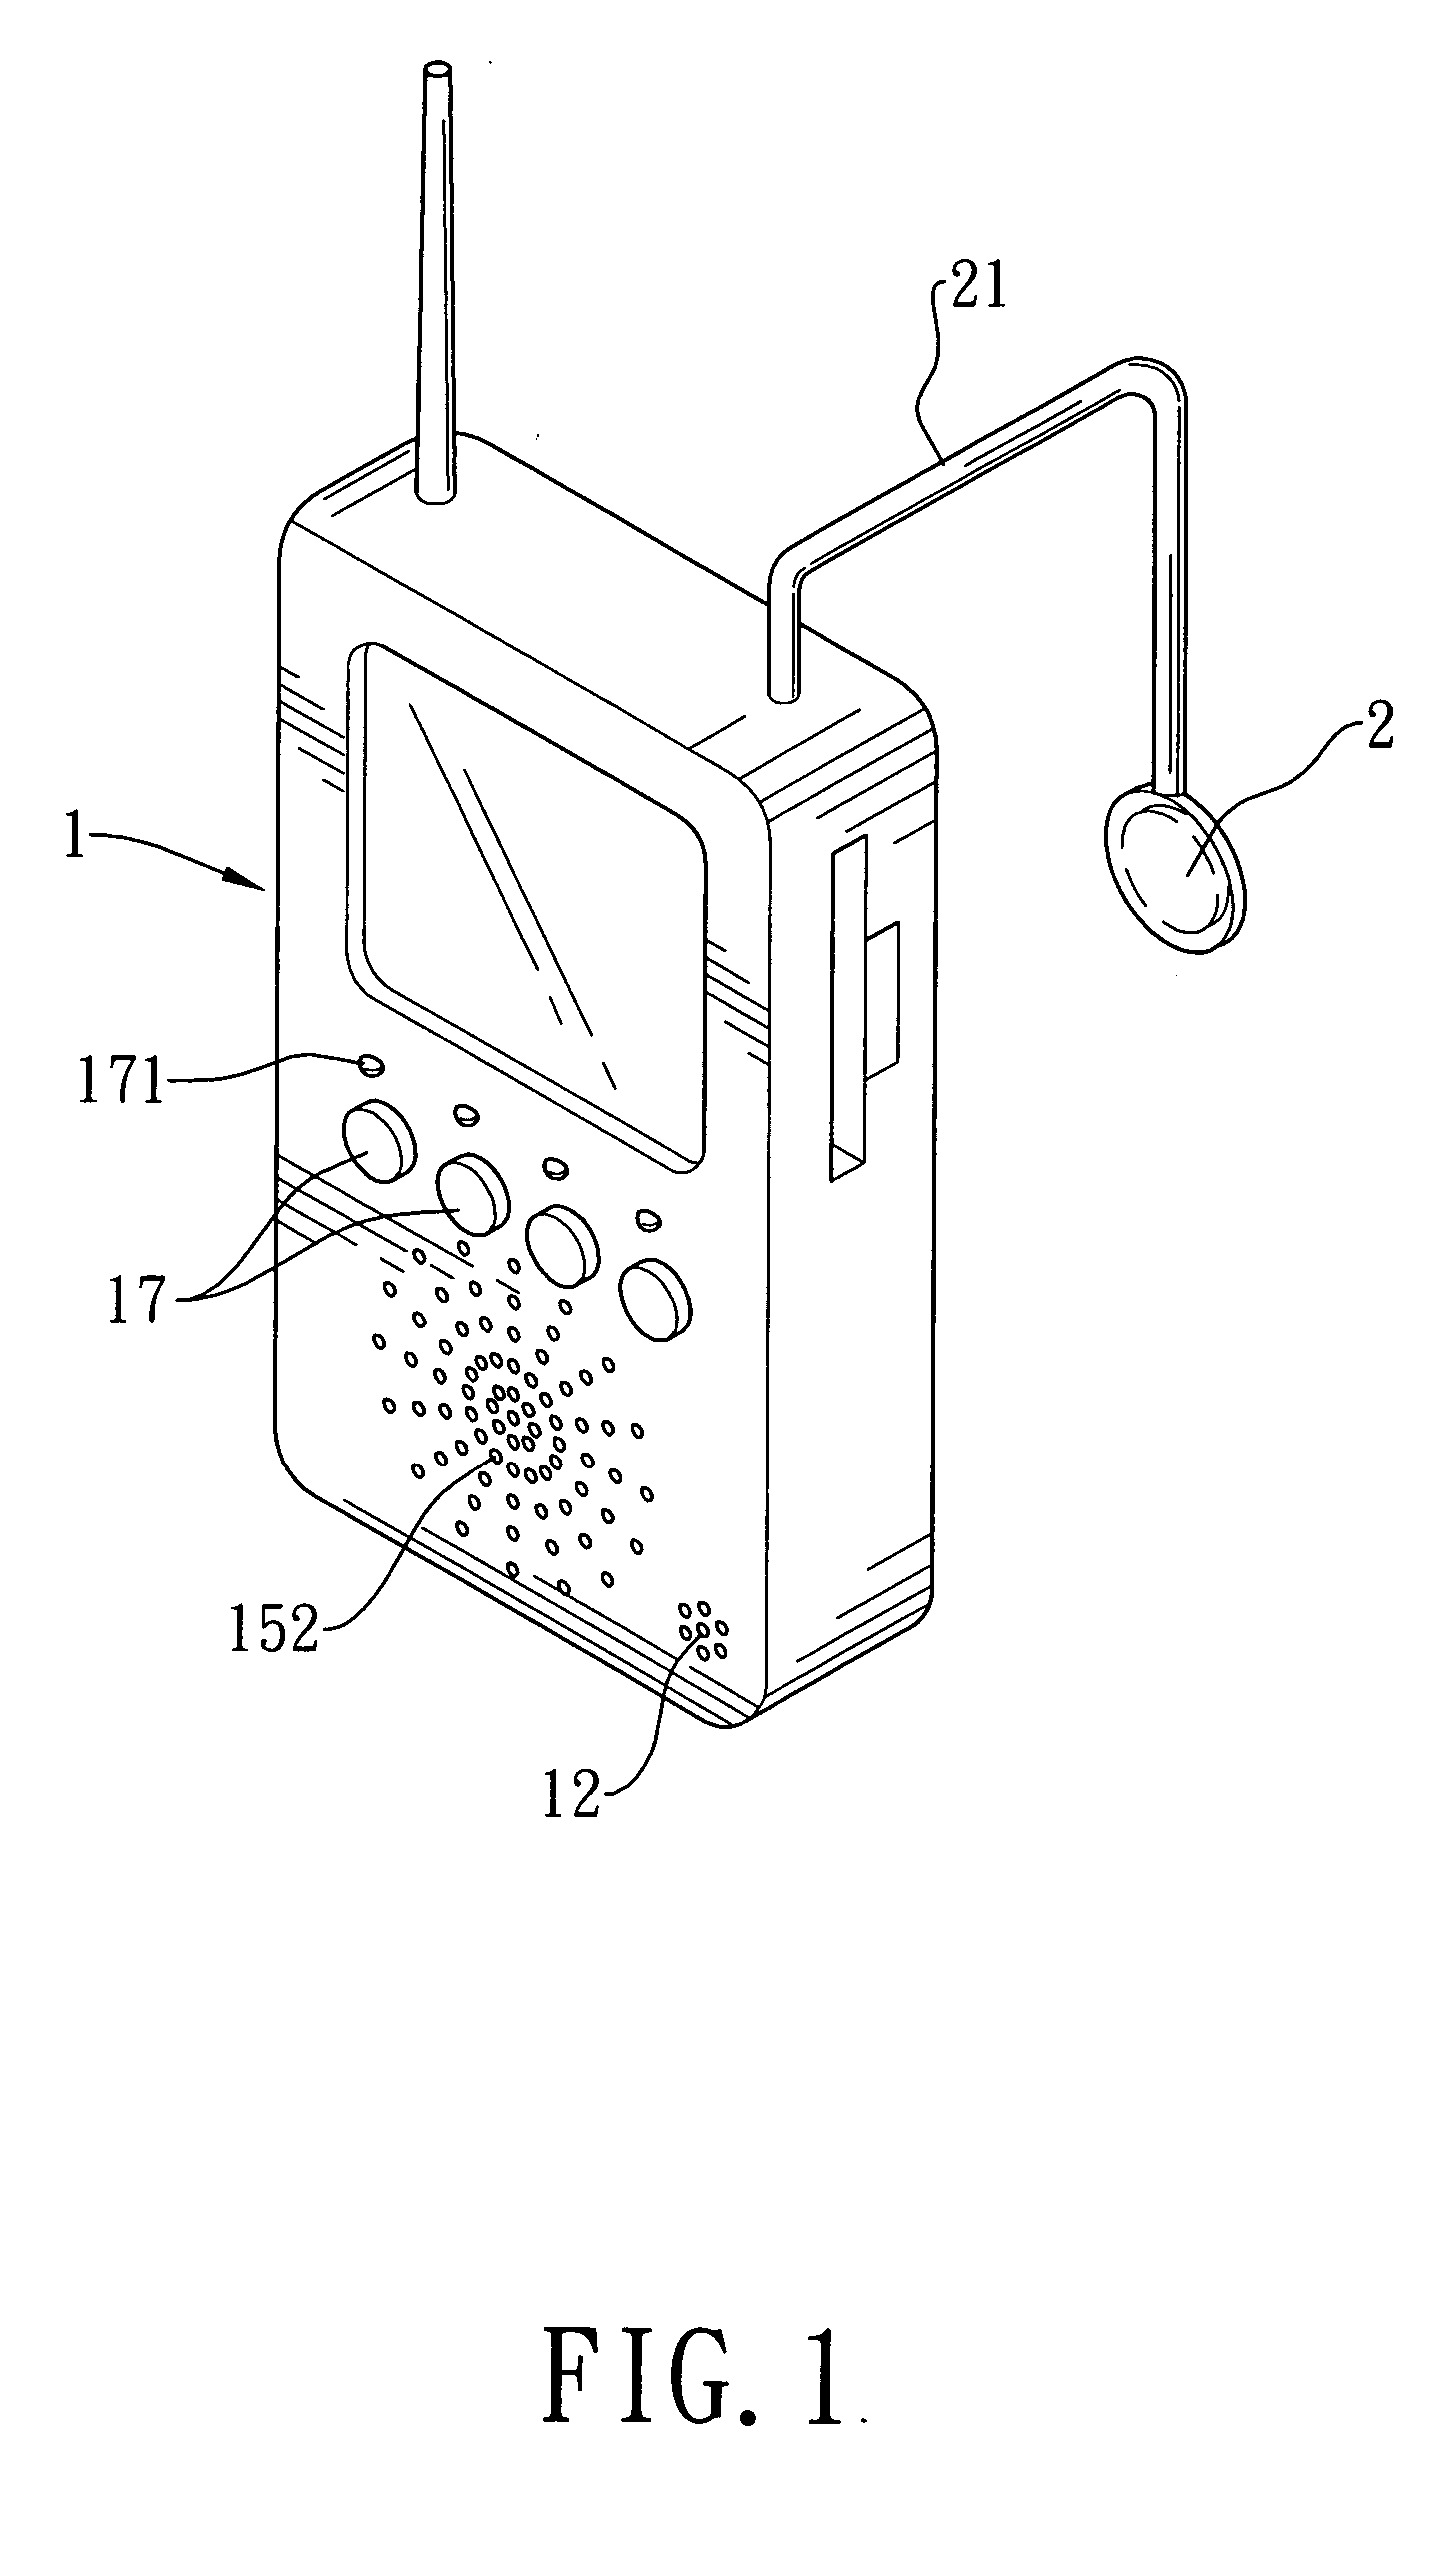 Apparatus for leaving message on refrigerator